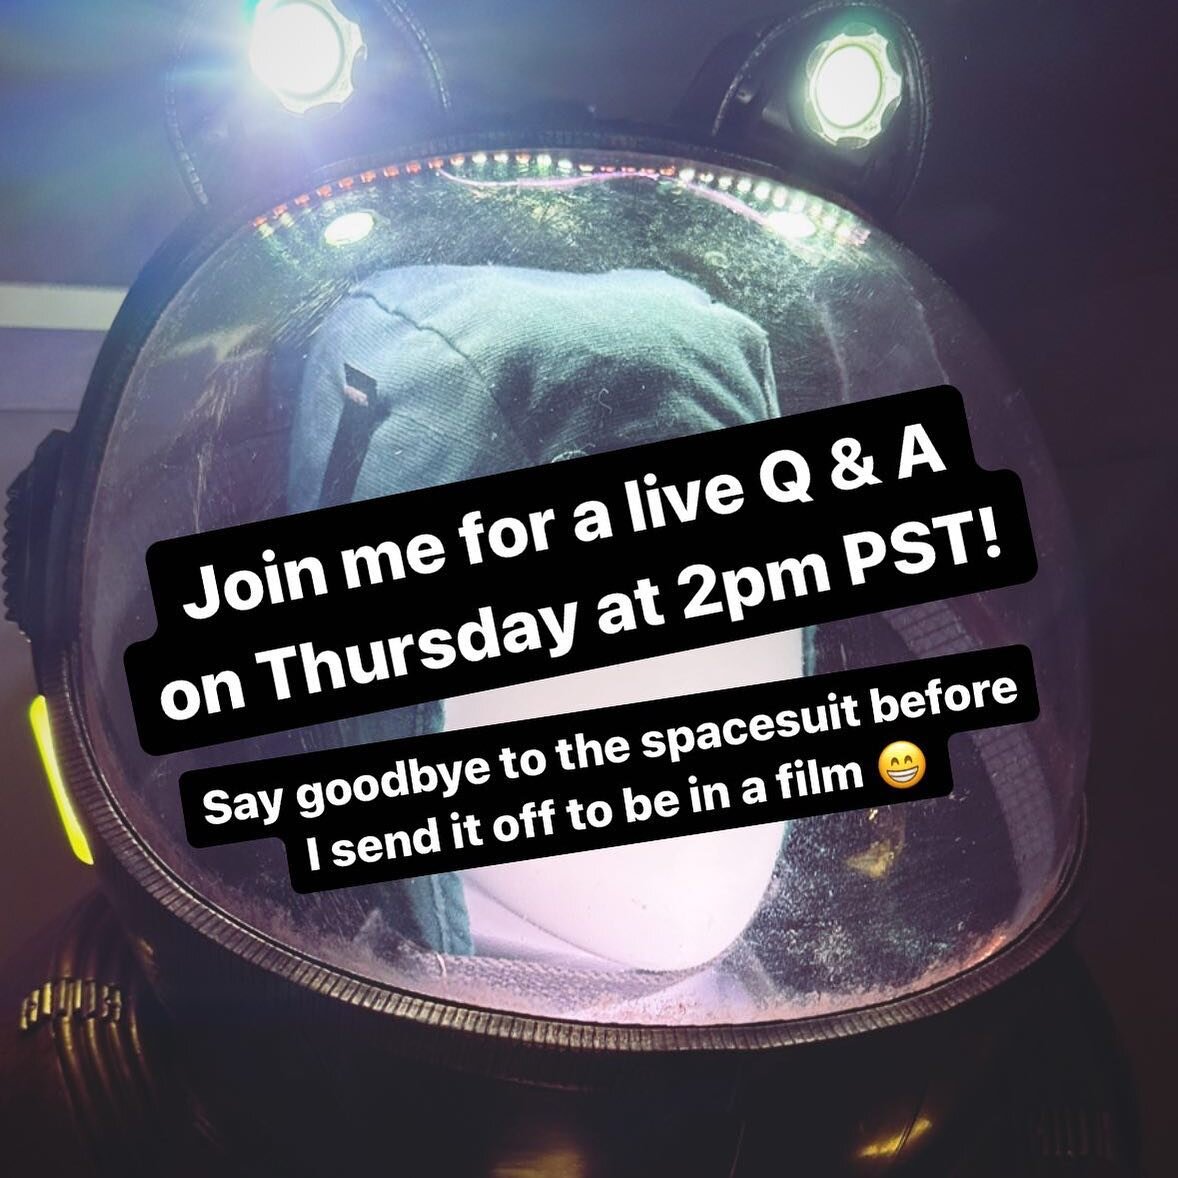 This week I&rsquo;m packing up the spacesuit to send it off to fulfill its destiny in a short film! Before I do, I want to say a HUGE thank you to anyone who has been following this build, especially those who have seen this project grow from the beg